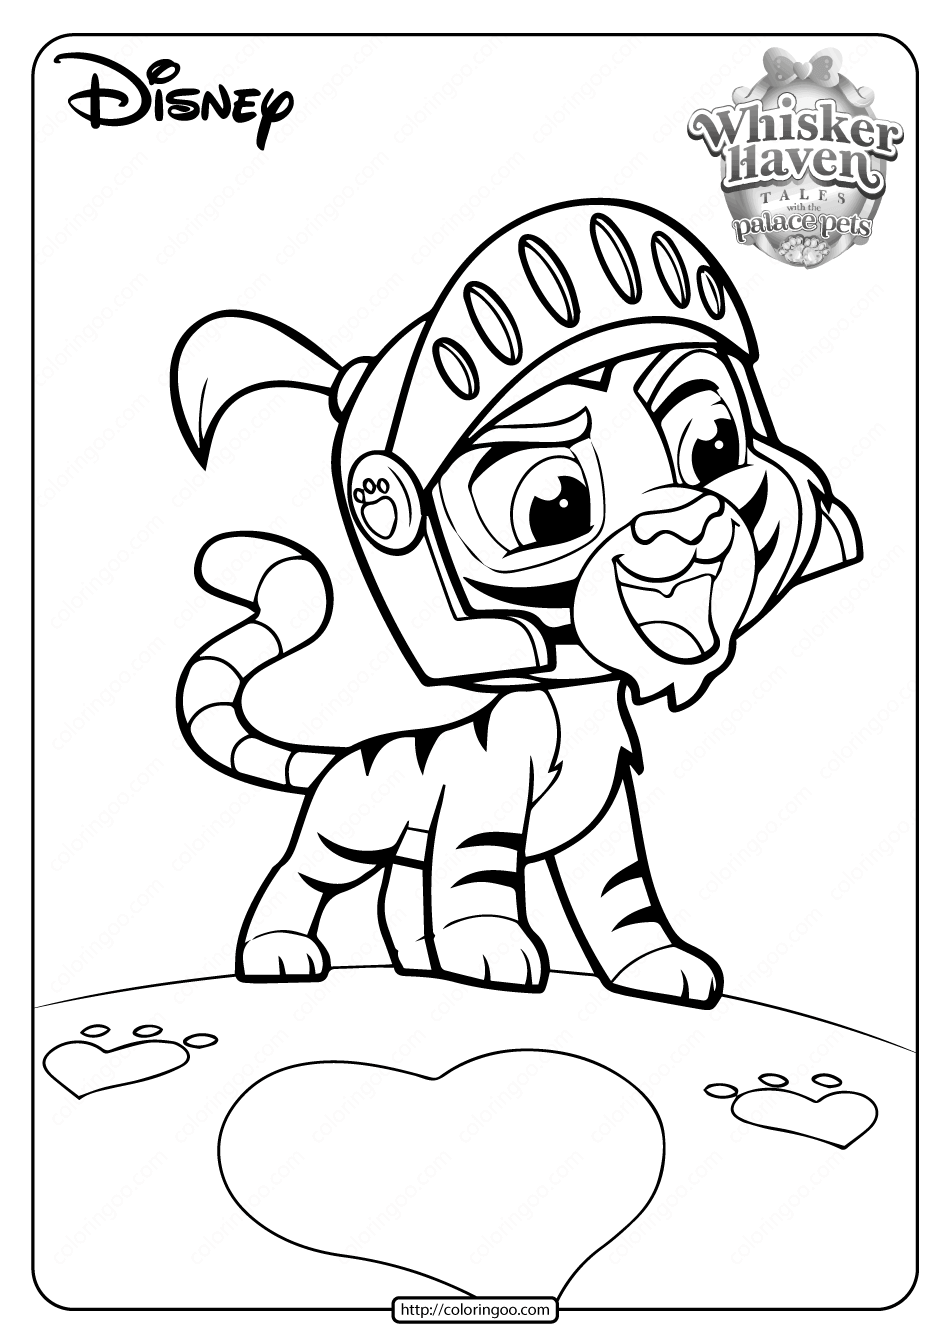 printable whisker haven tales palace pets coloring pages